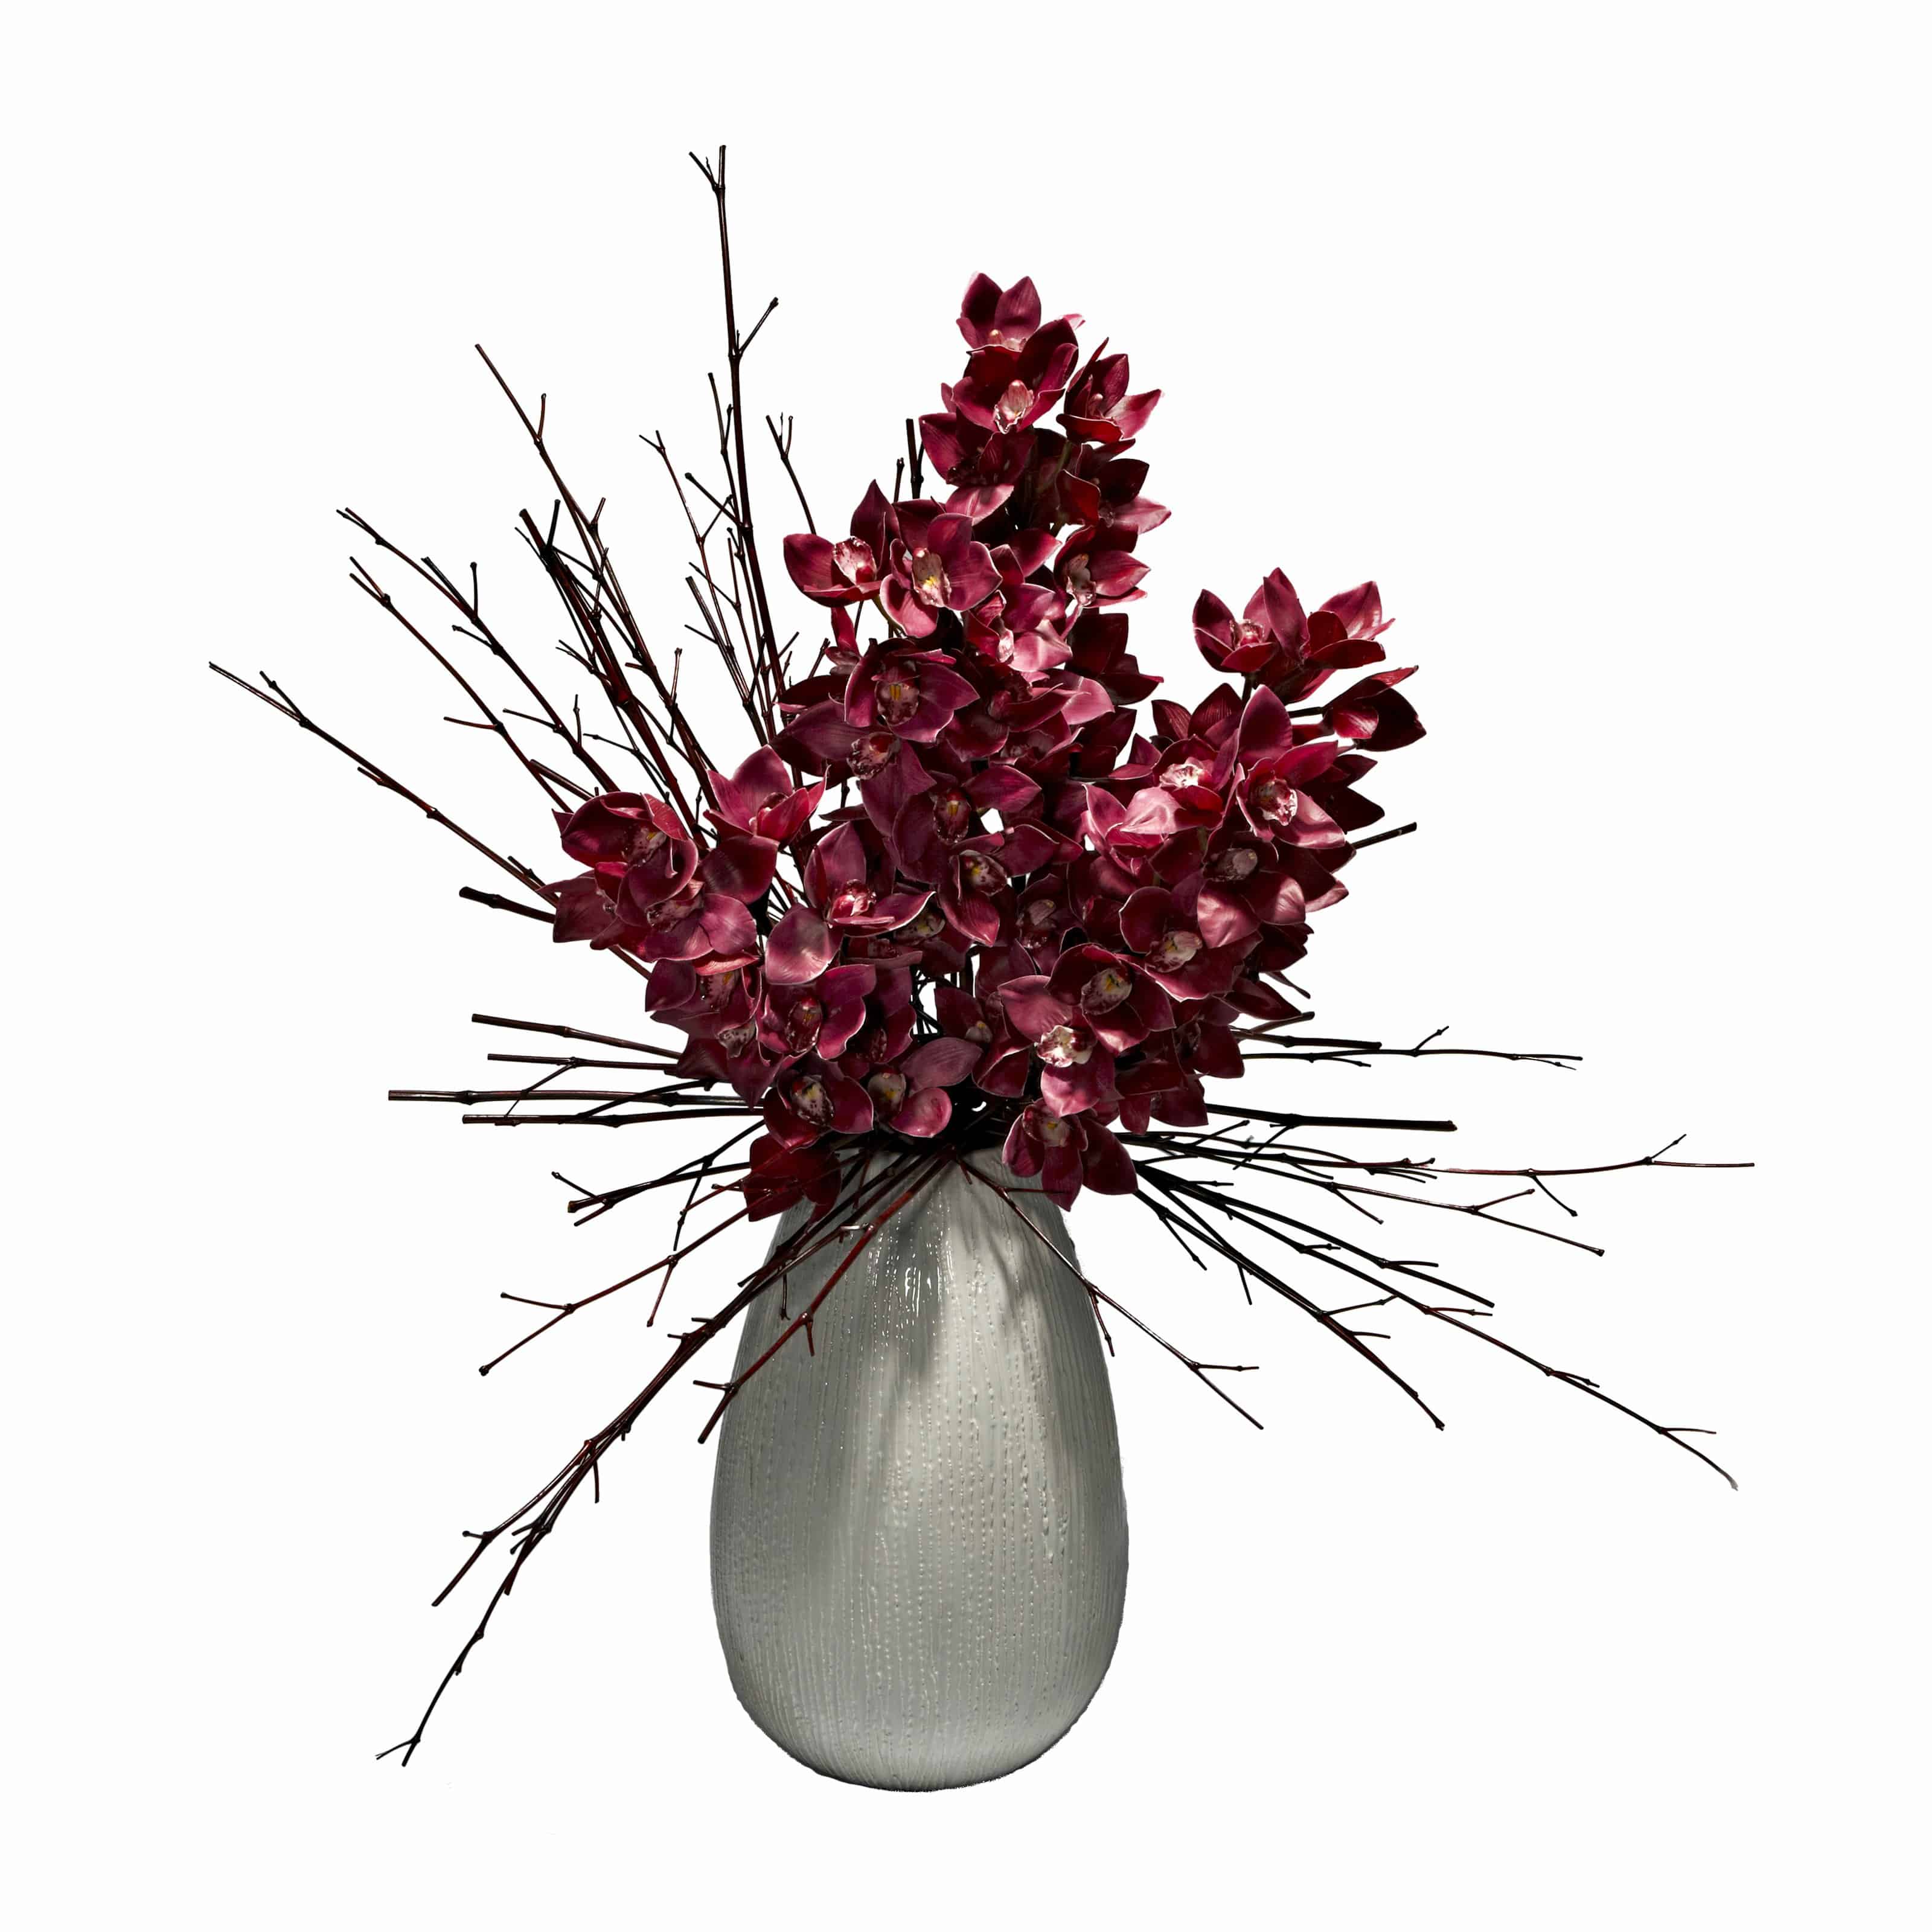 You'll love our minimalistic chic mauve silk flower cymbidium orchid in a white eggplant shaped ceramic vase. Effortless luxury artificial orchid stems.